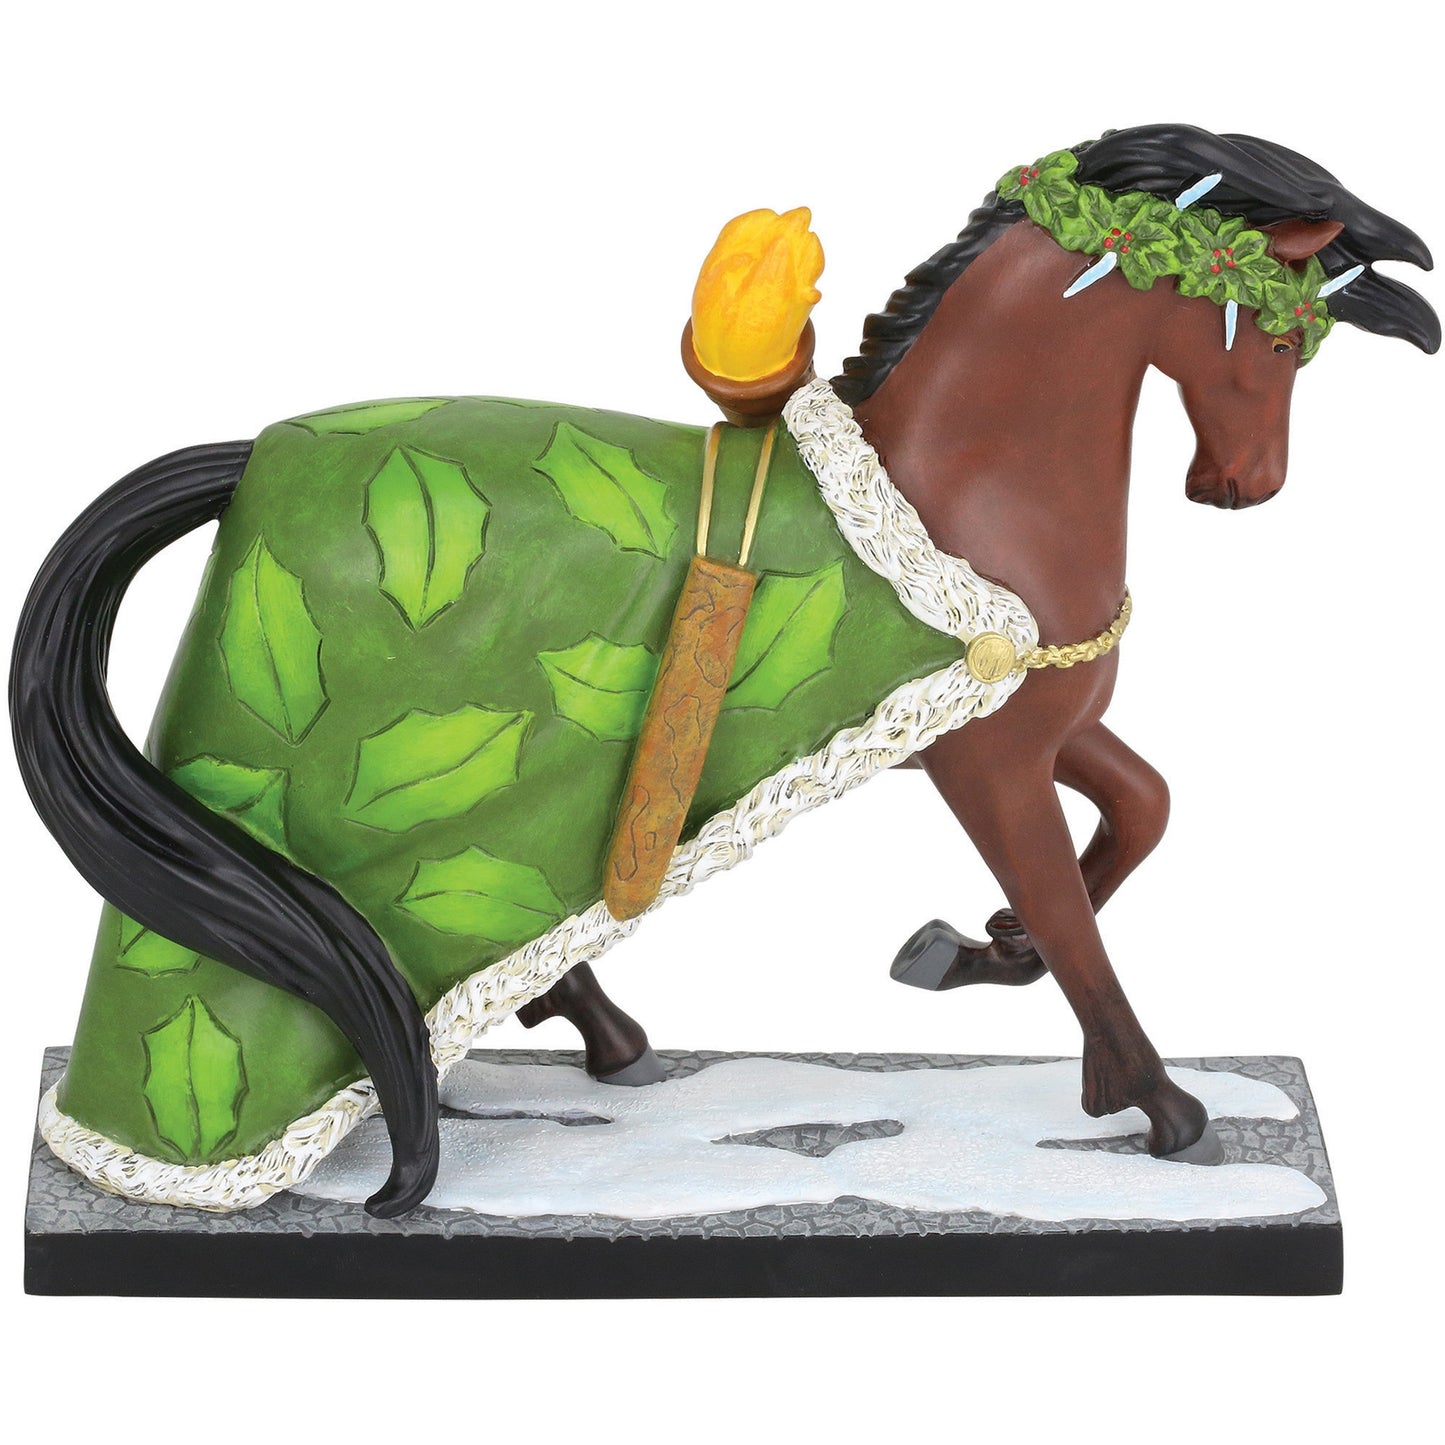 The Trail of Painted Ponies - Spirit of Christmas Present-Top Brands-The Equestrian